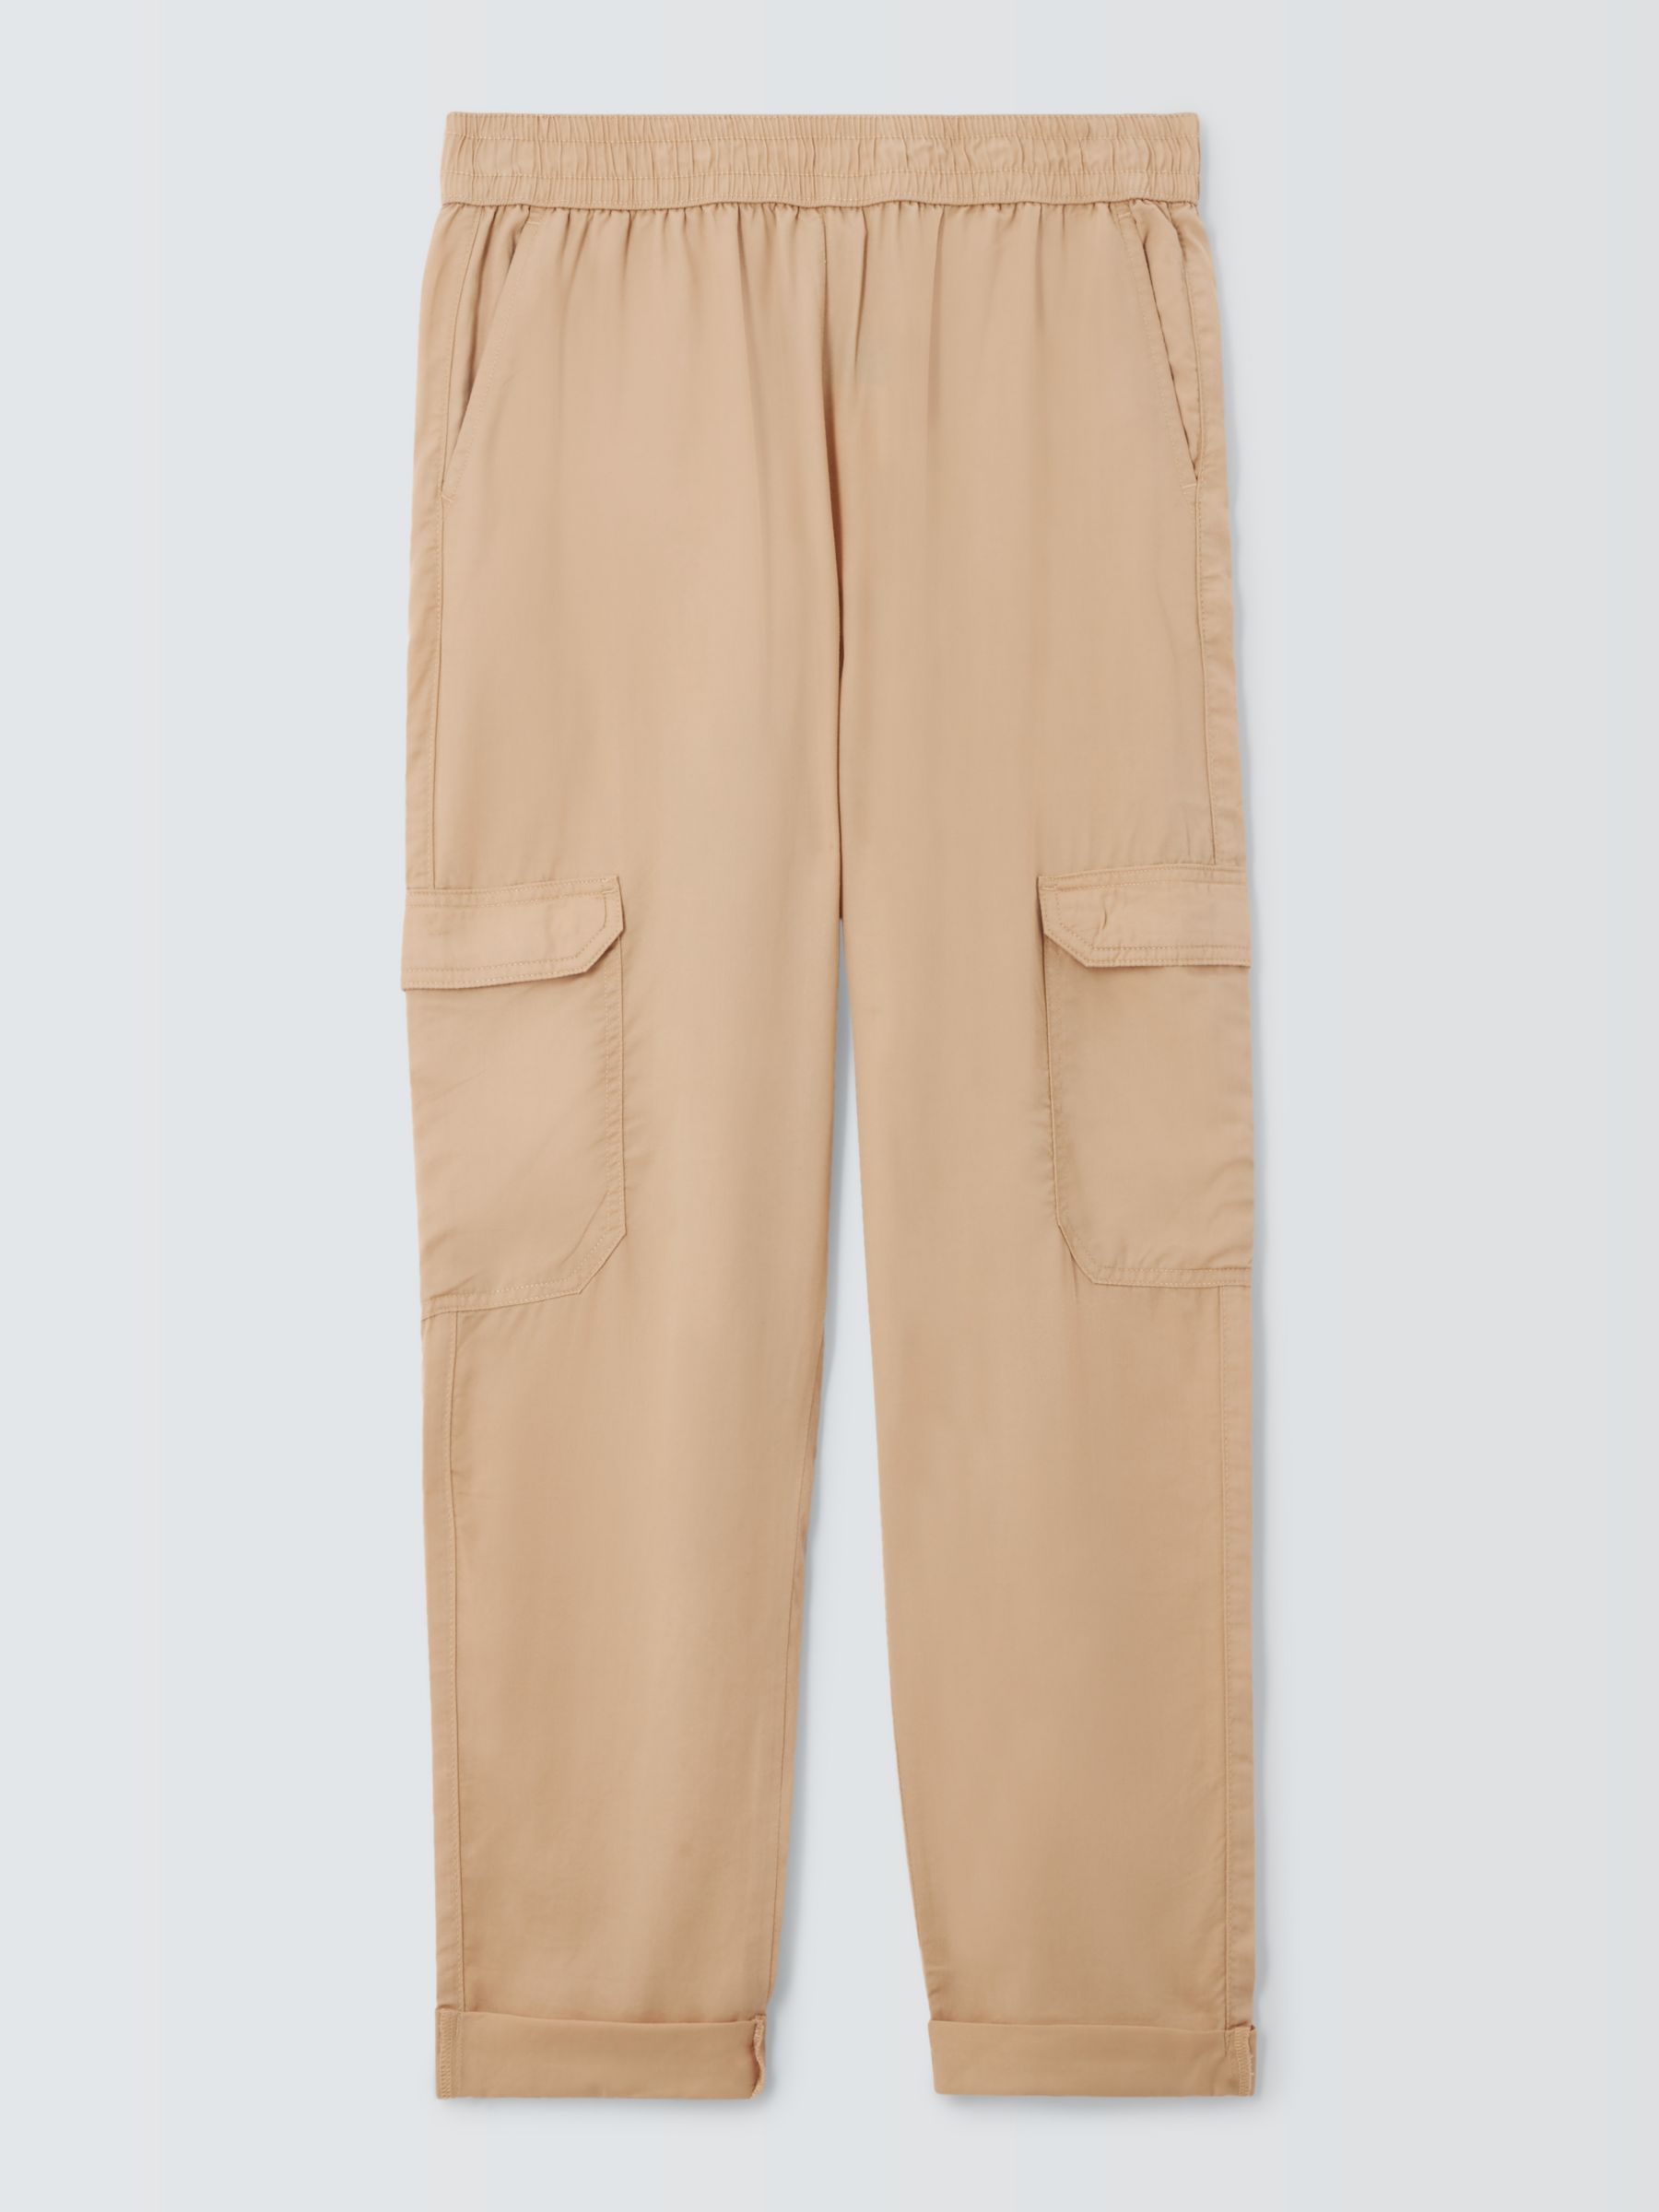 John Lewis ANYDAY Turnup Cargo Trousers, Stone, 6